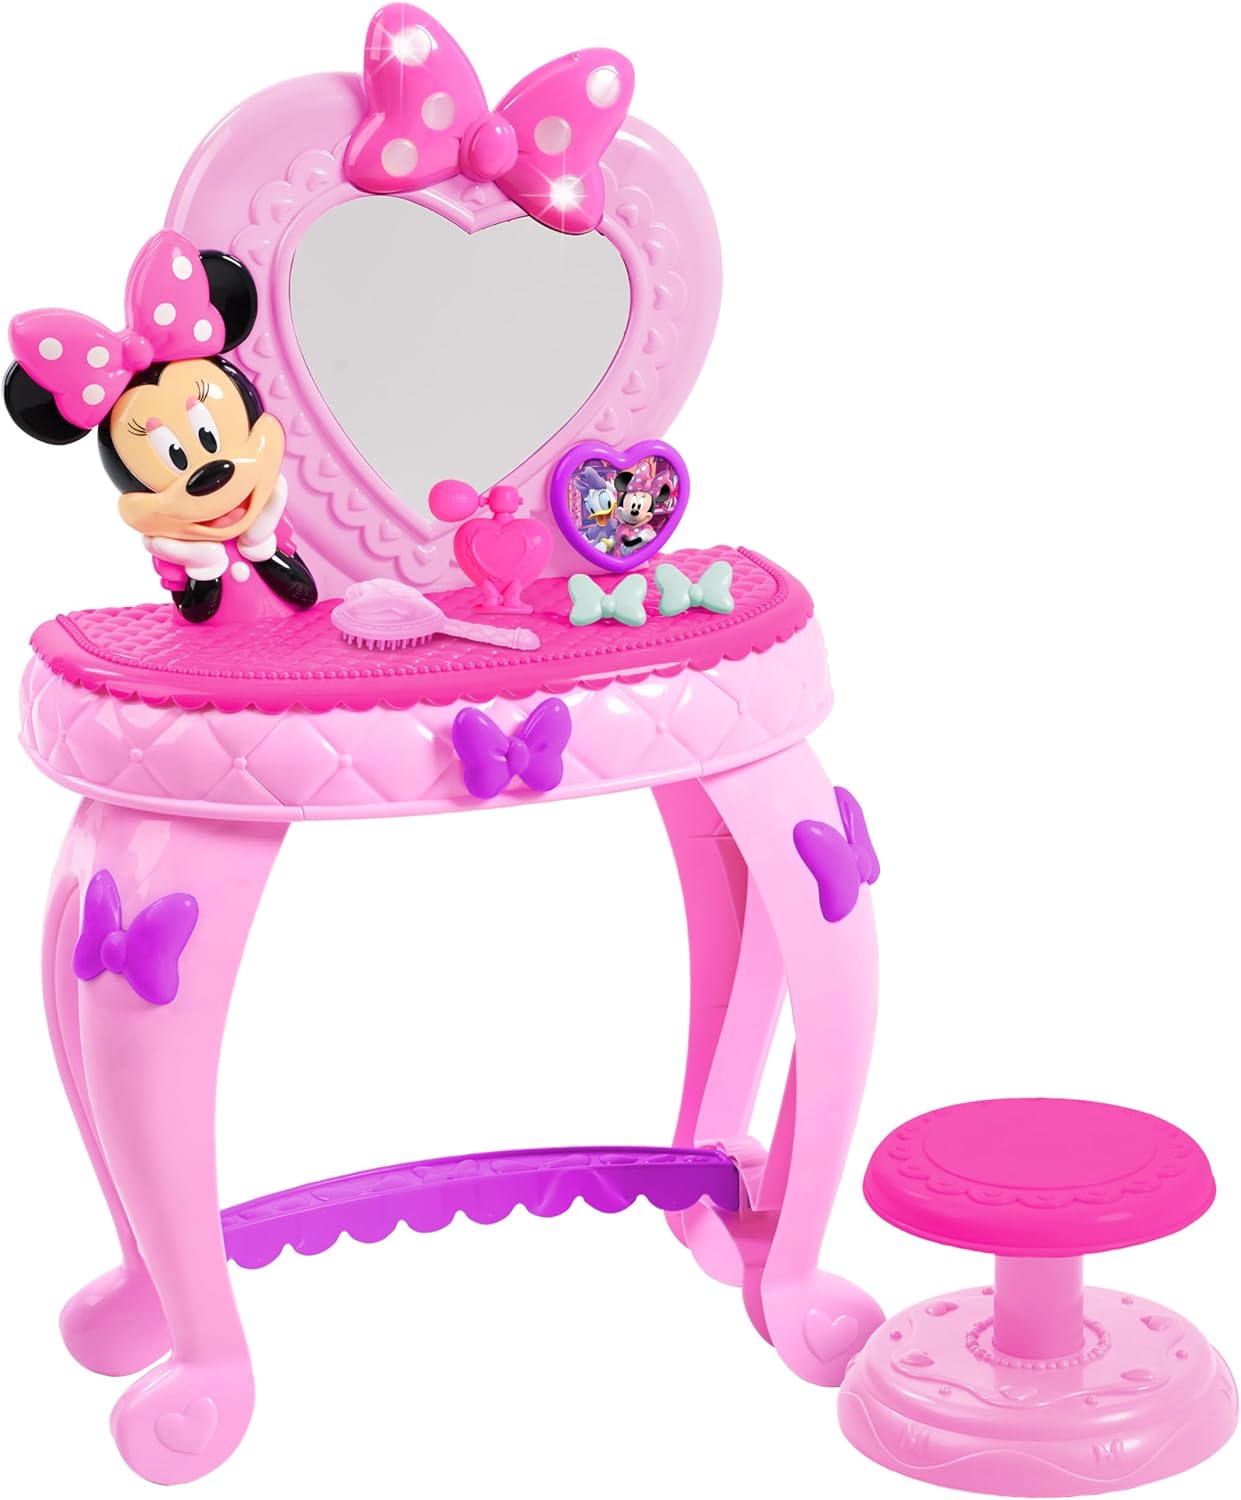 Minnie Mouse Bow-Tique Bowdazzling Vanity